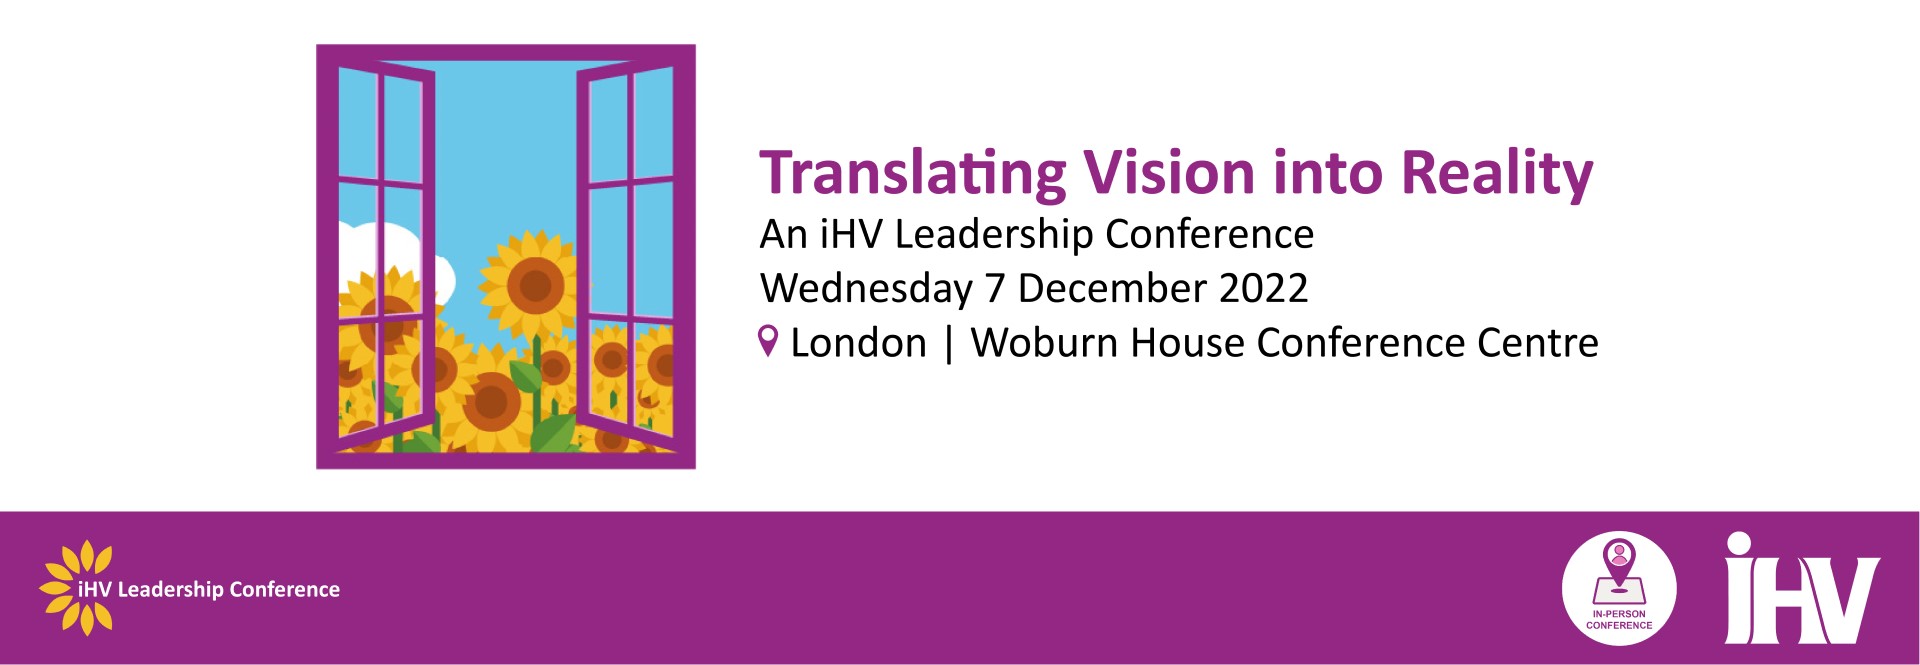 iHV Leadership Conference: Translating Vision into Reality